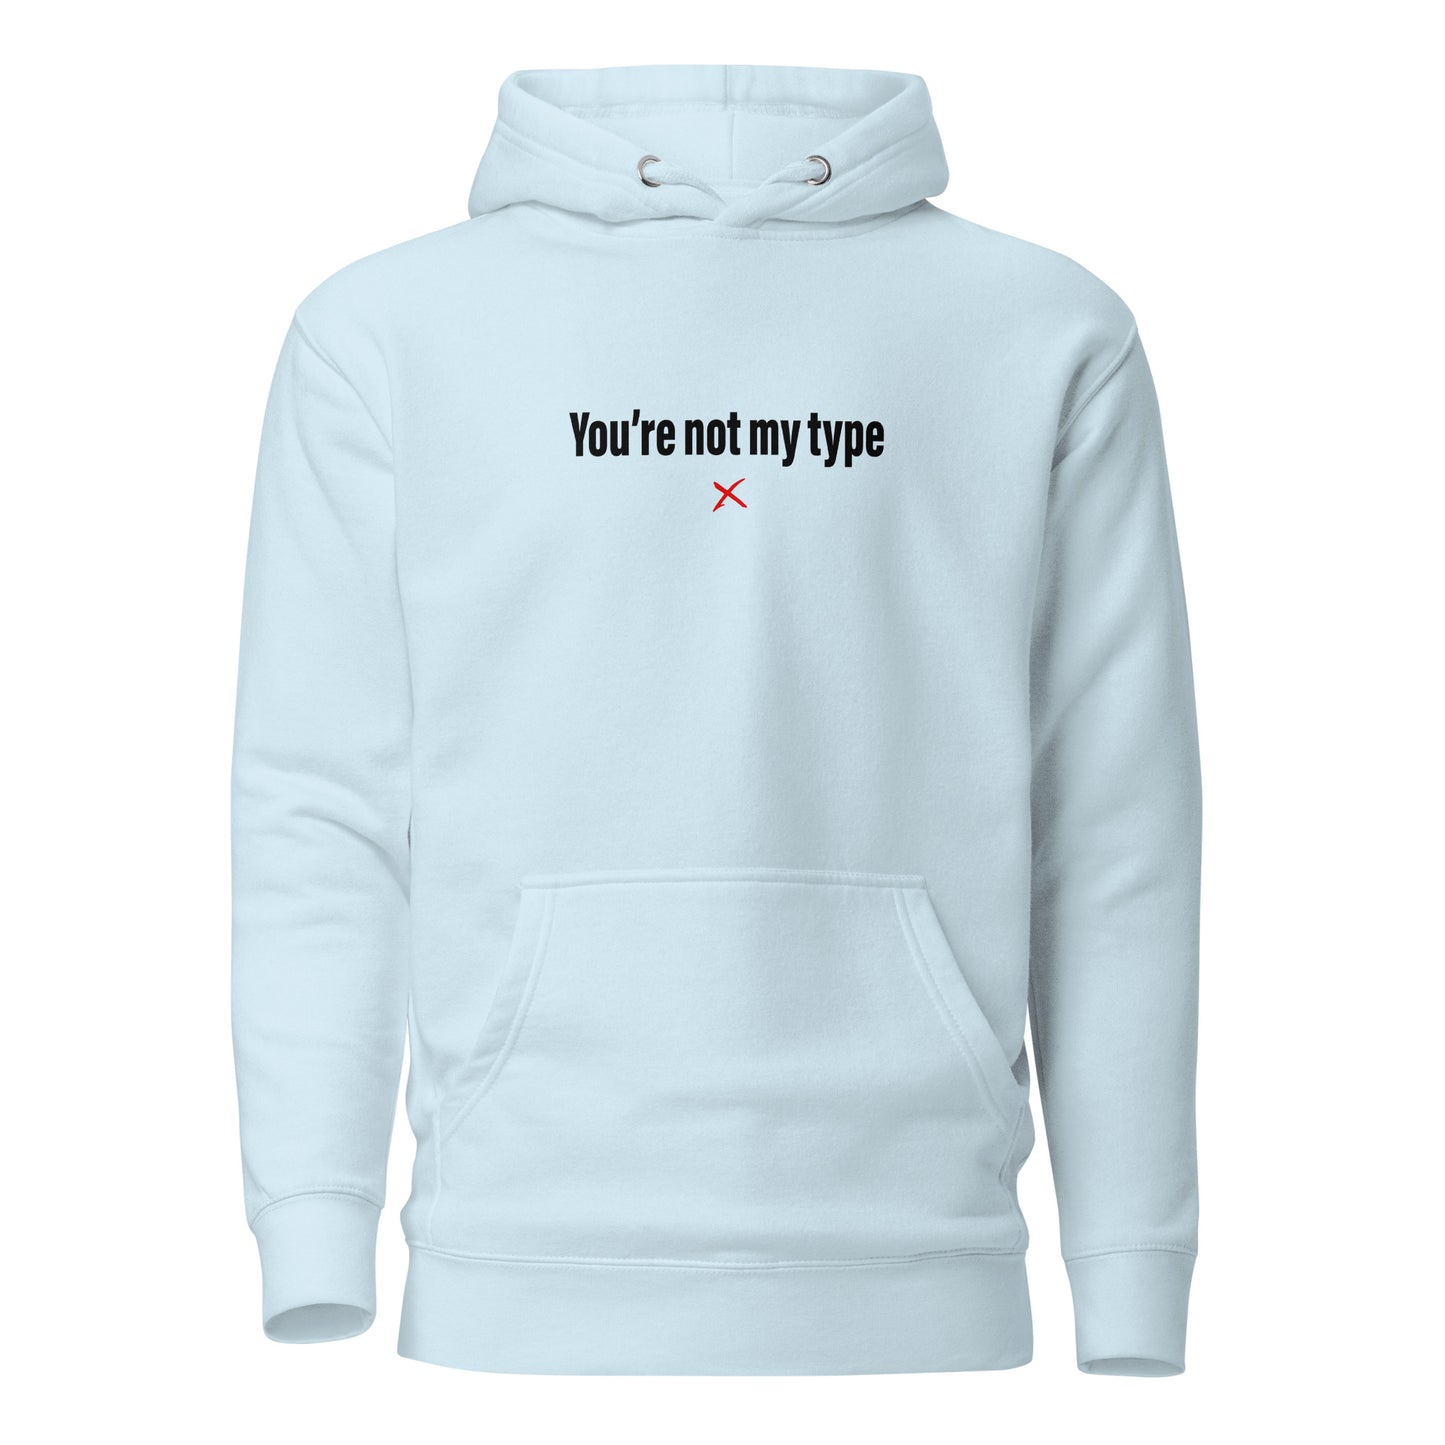 You're not my type - Hoodie